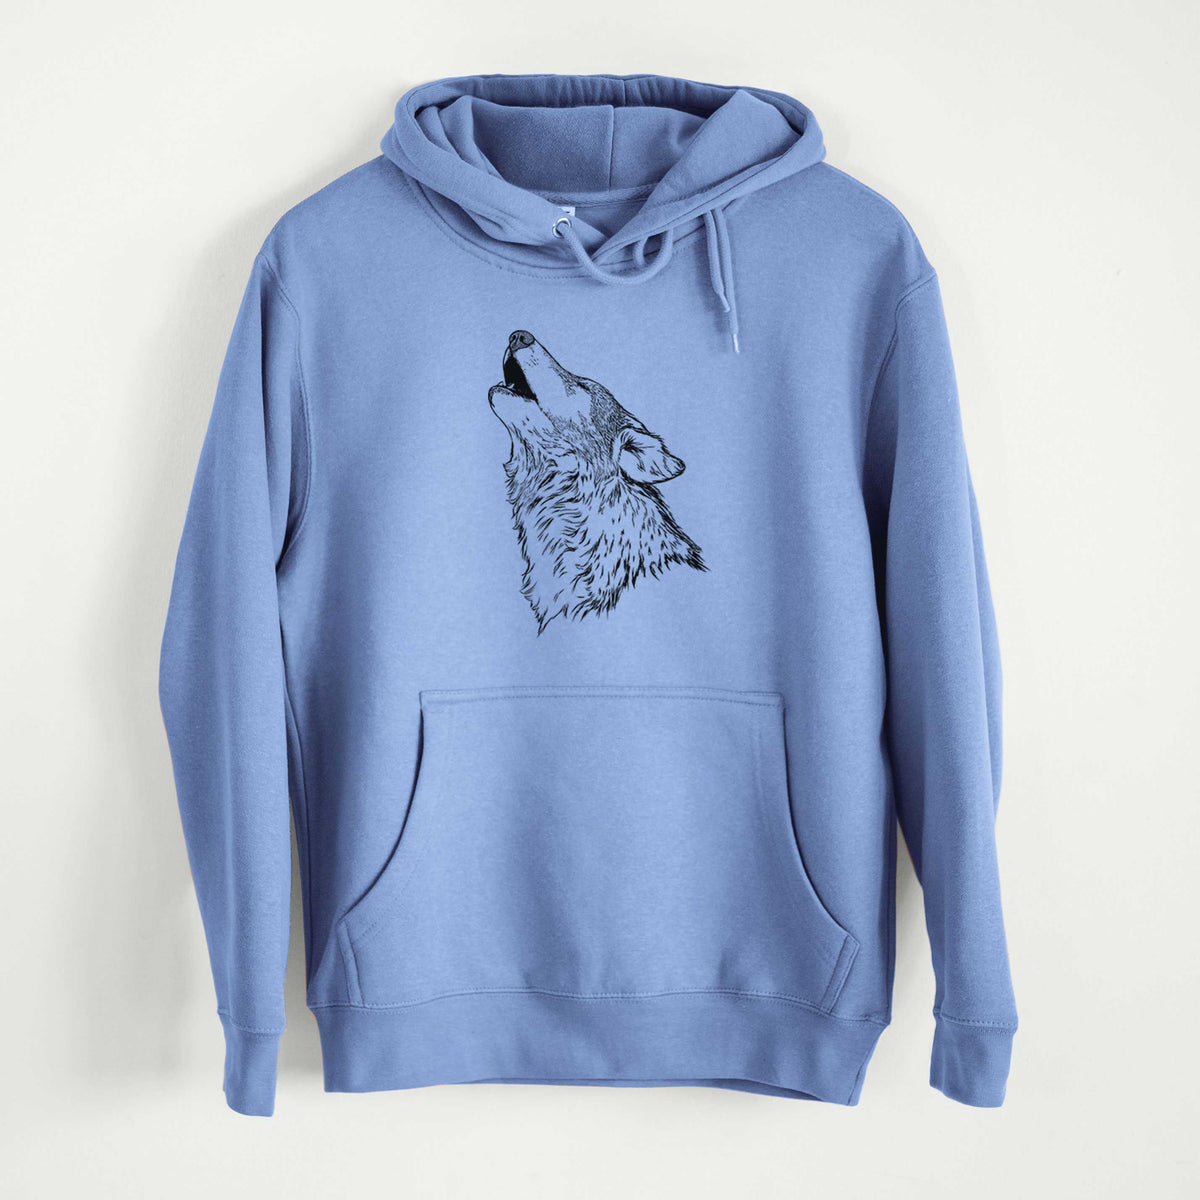 Canis lupus - Grey Wolf Howling  - Mid-Weight Unisex Premium Blend Hoodie